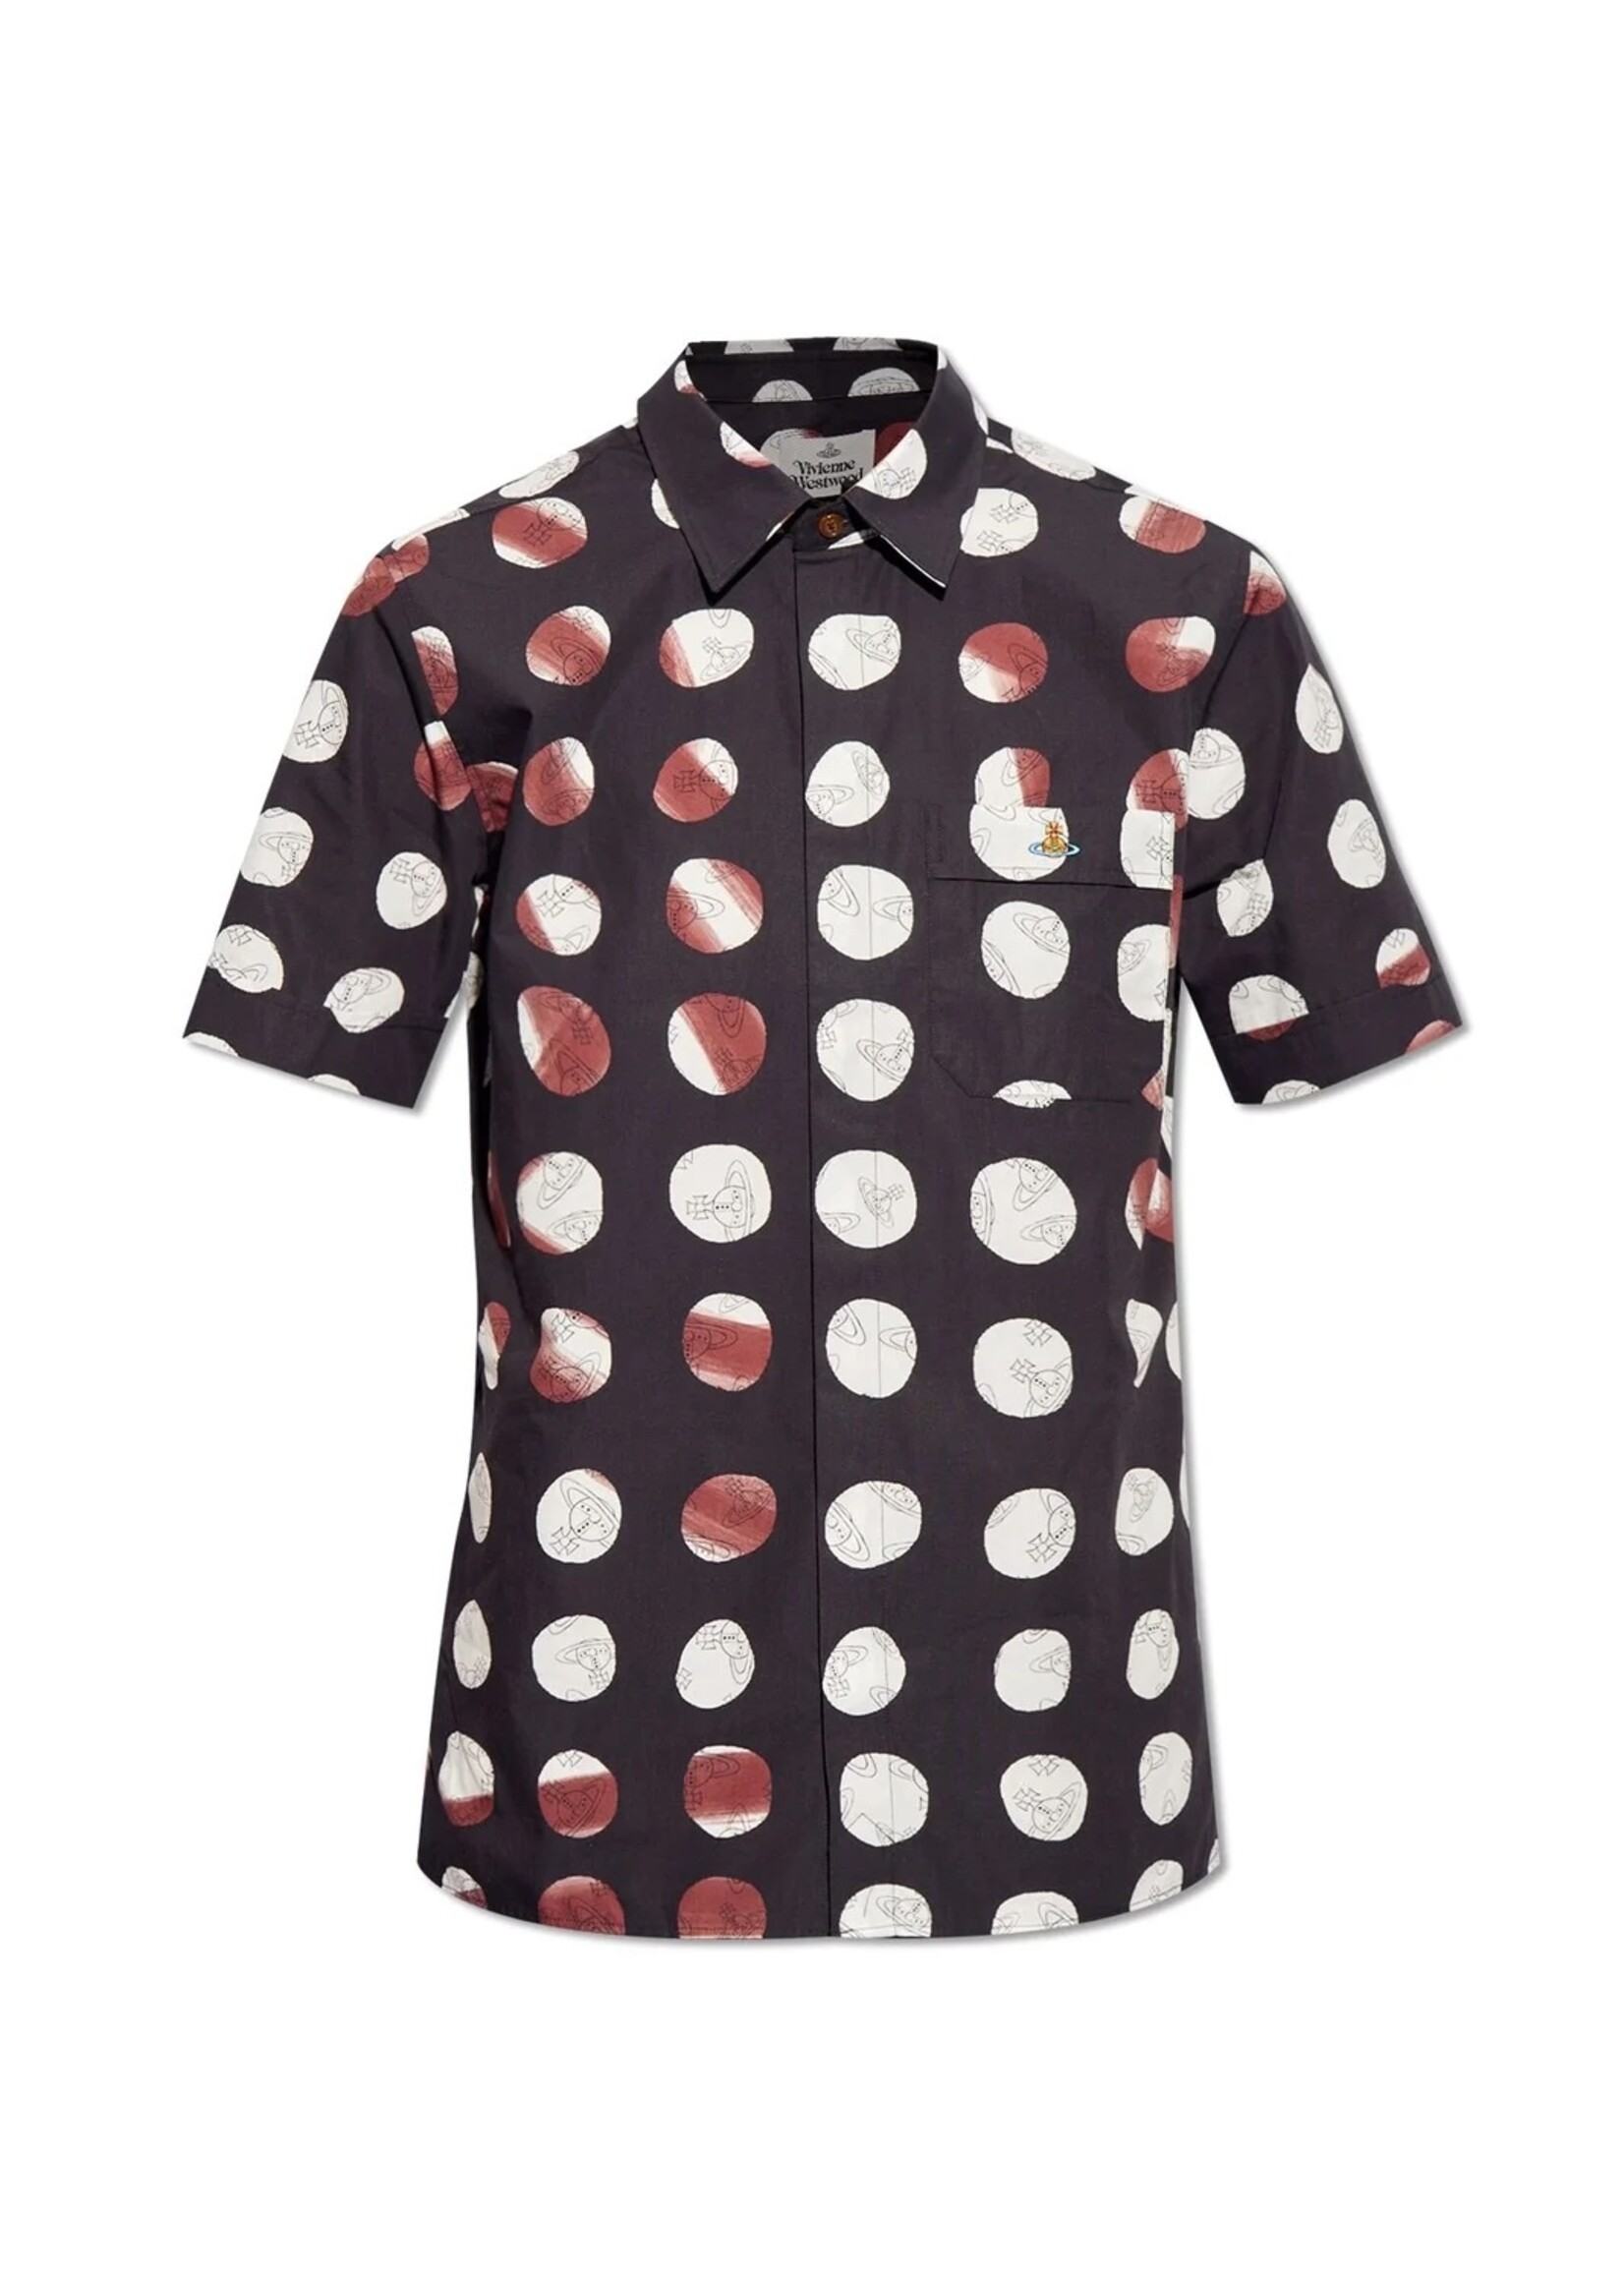 VIVIENNE WESTWOOD Short Sleeve Button Up Shirt in Dots & Orbs Print